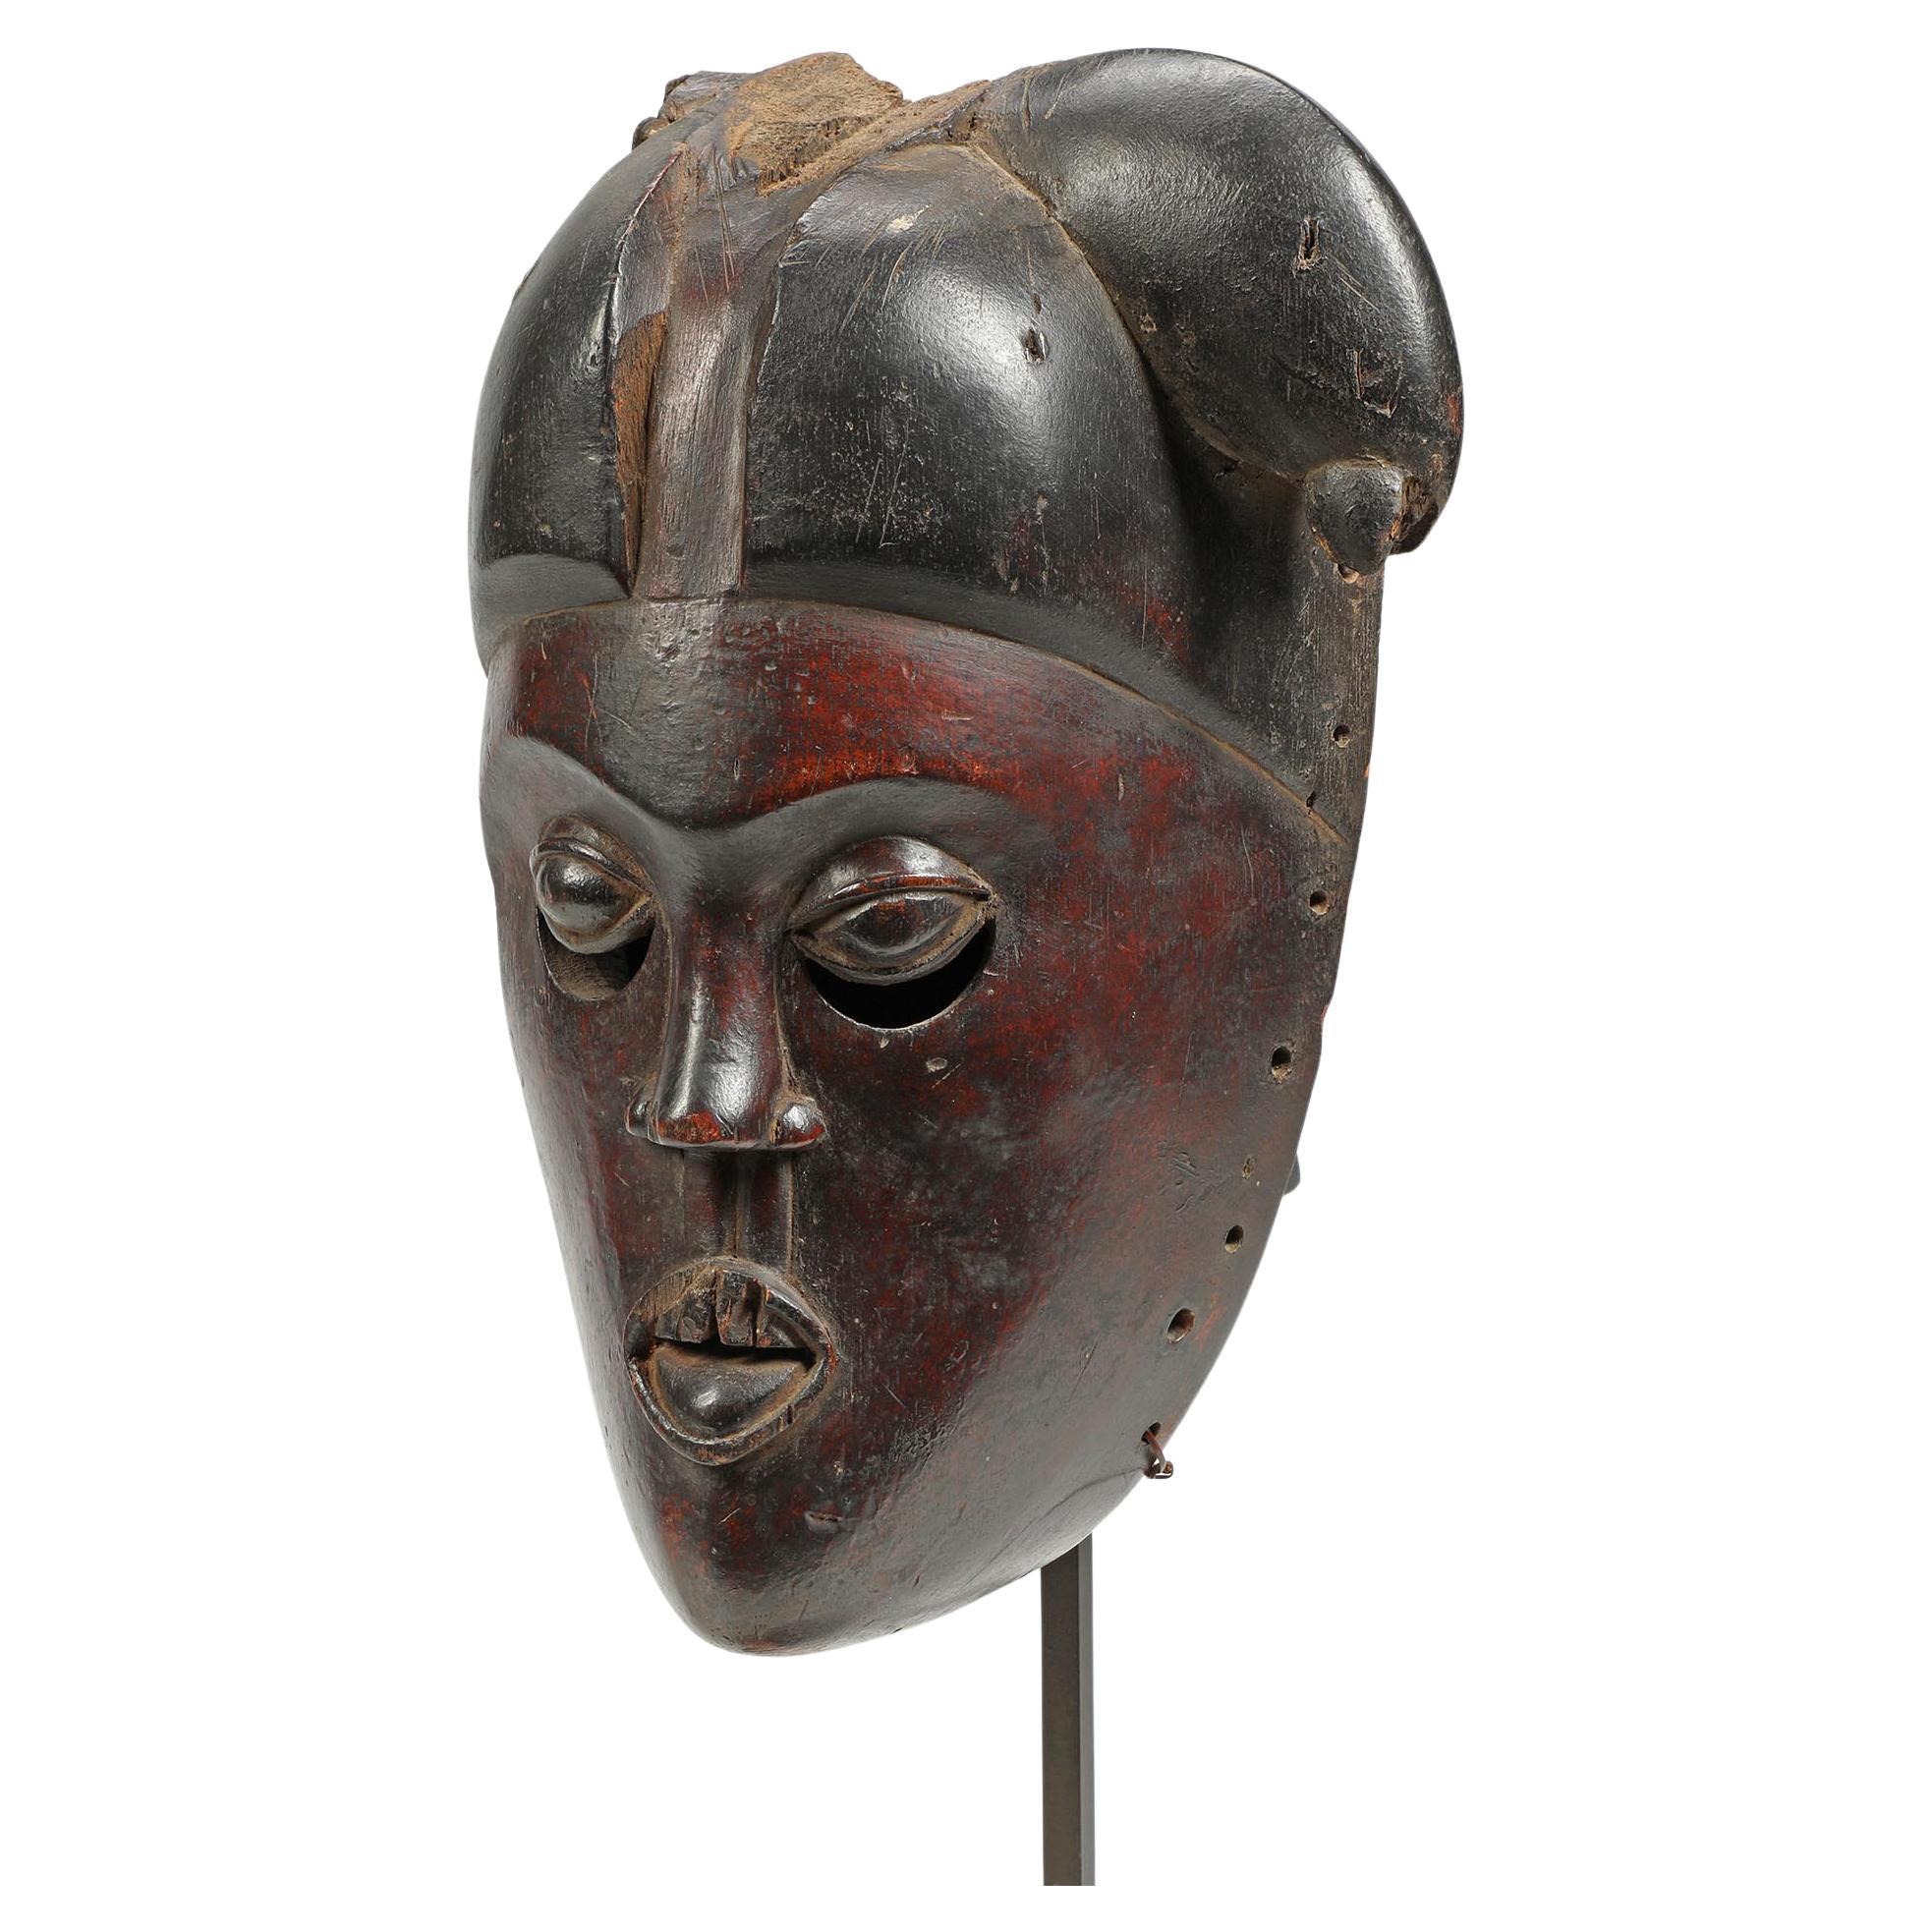 Early Ibibio Mask Fragment, Dark Red Face, Expressive Eyes, Early 20th C Africa